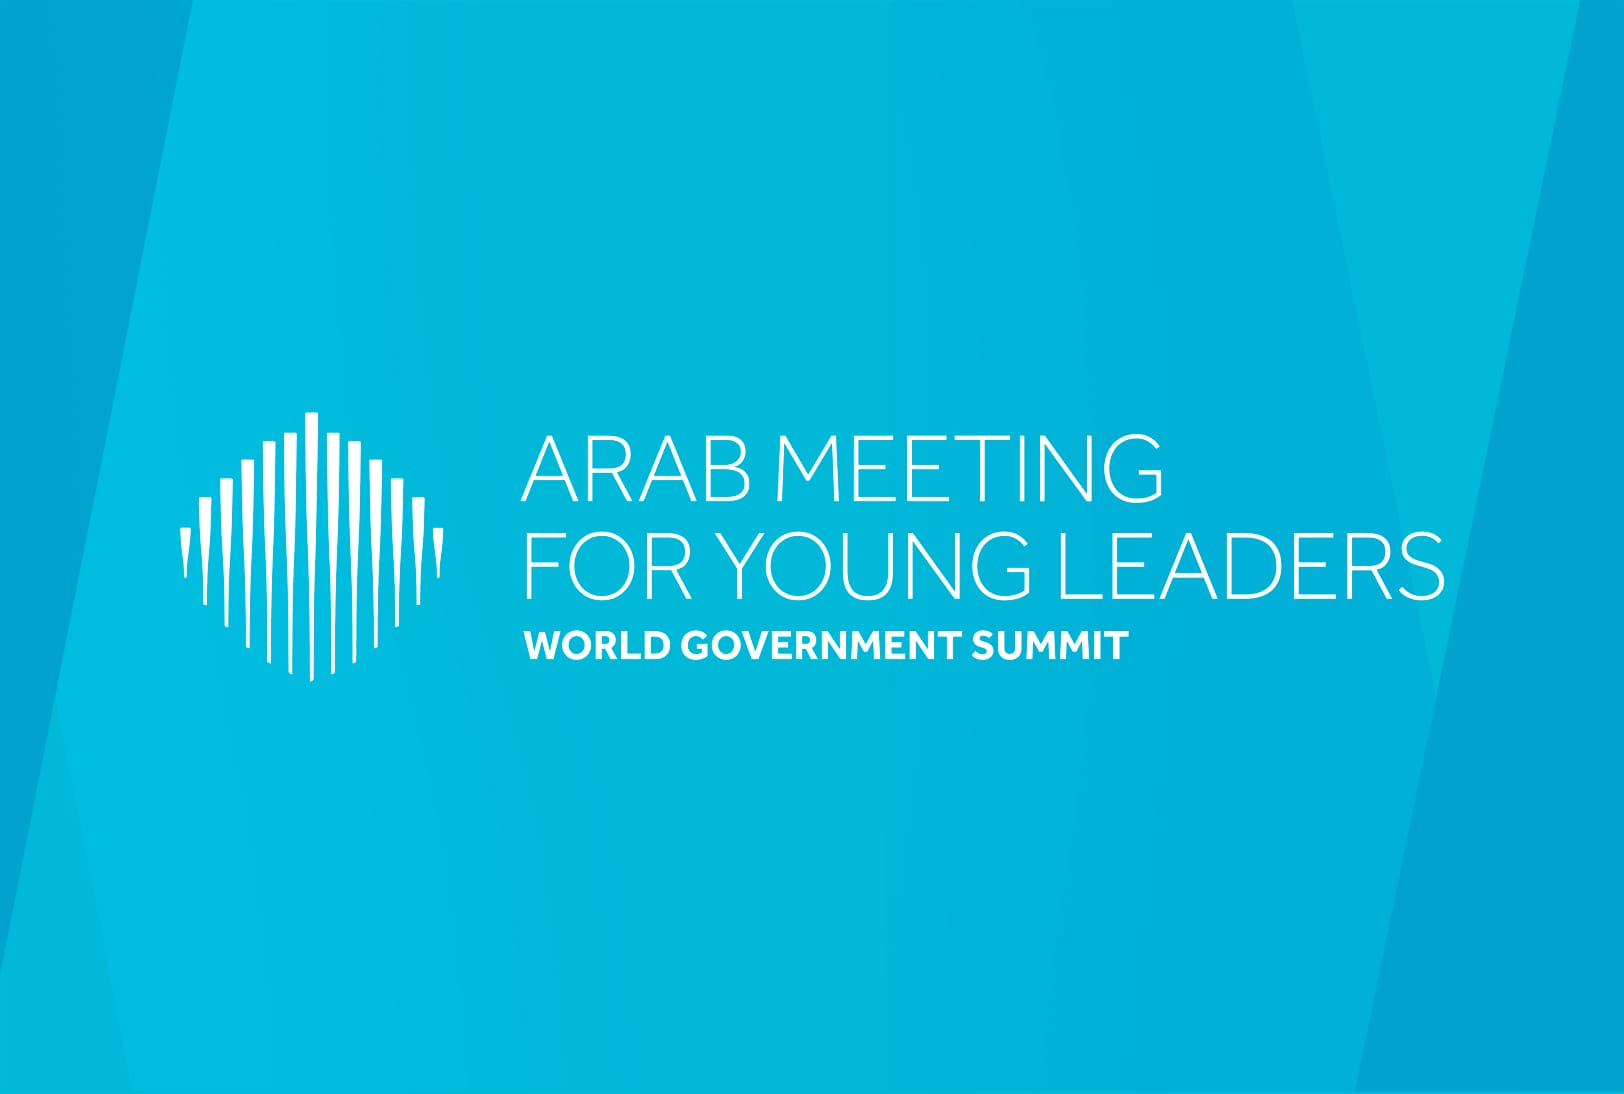 Arab Meeting for Young Leaders